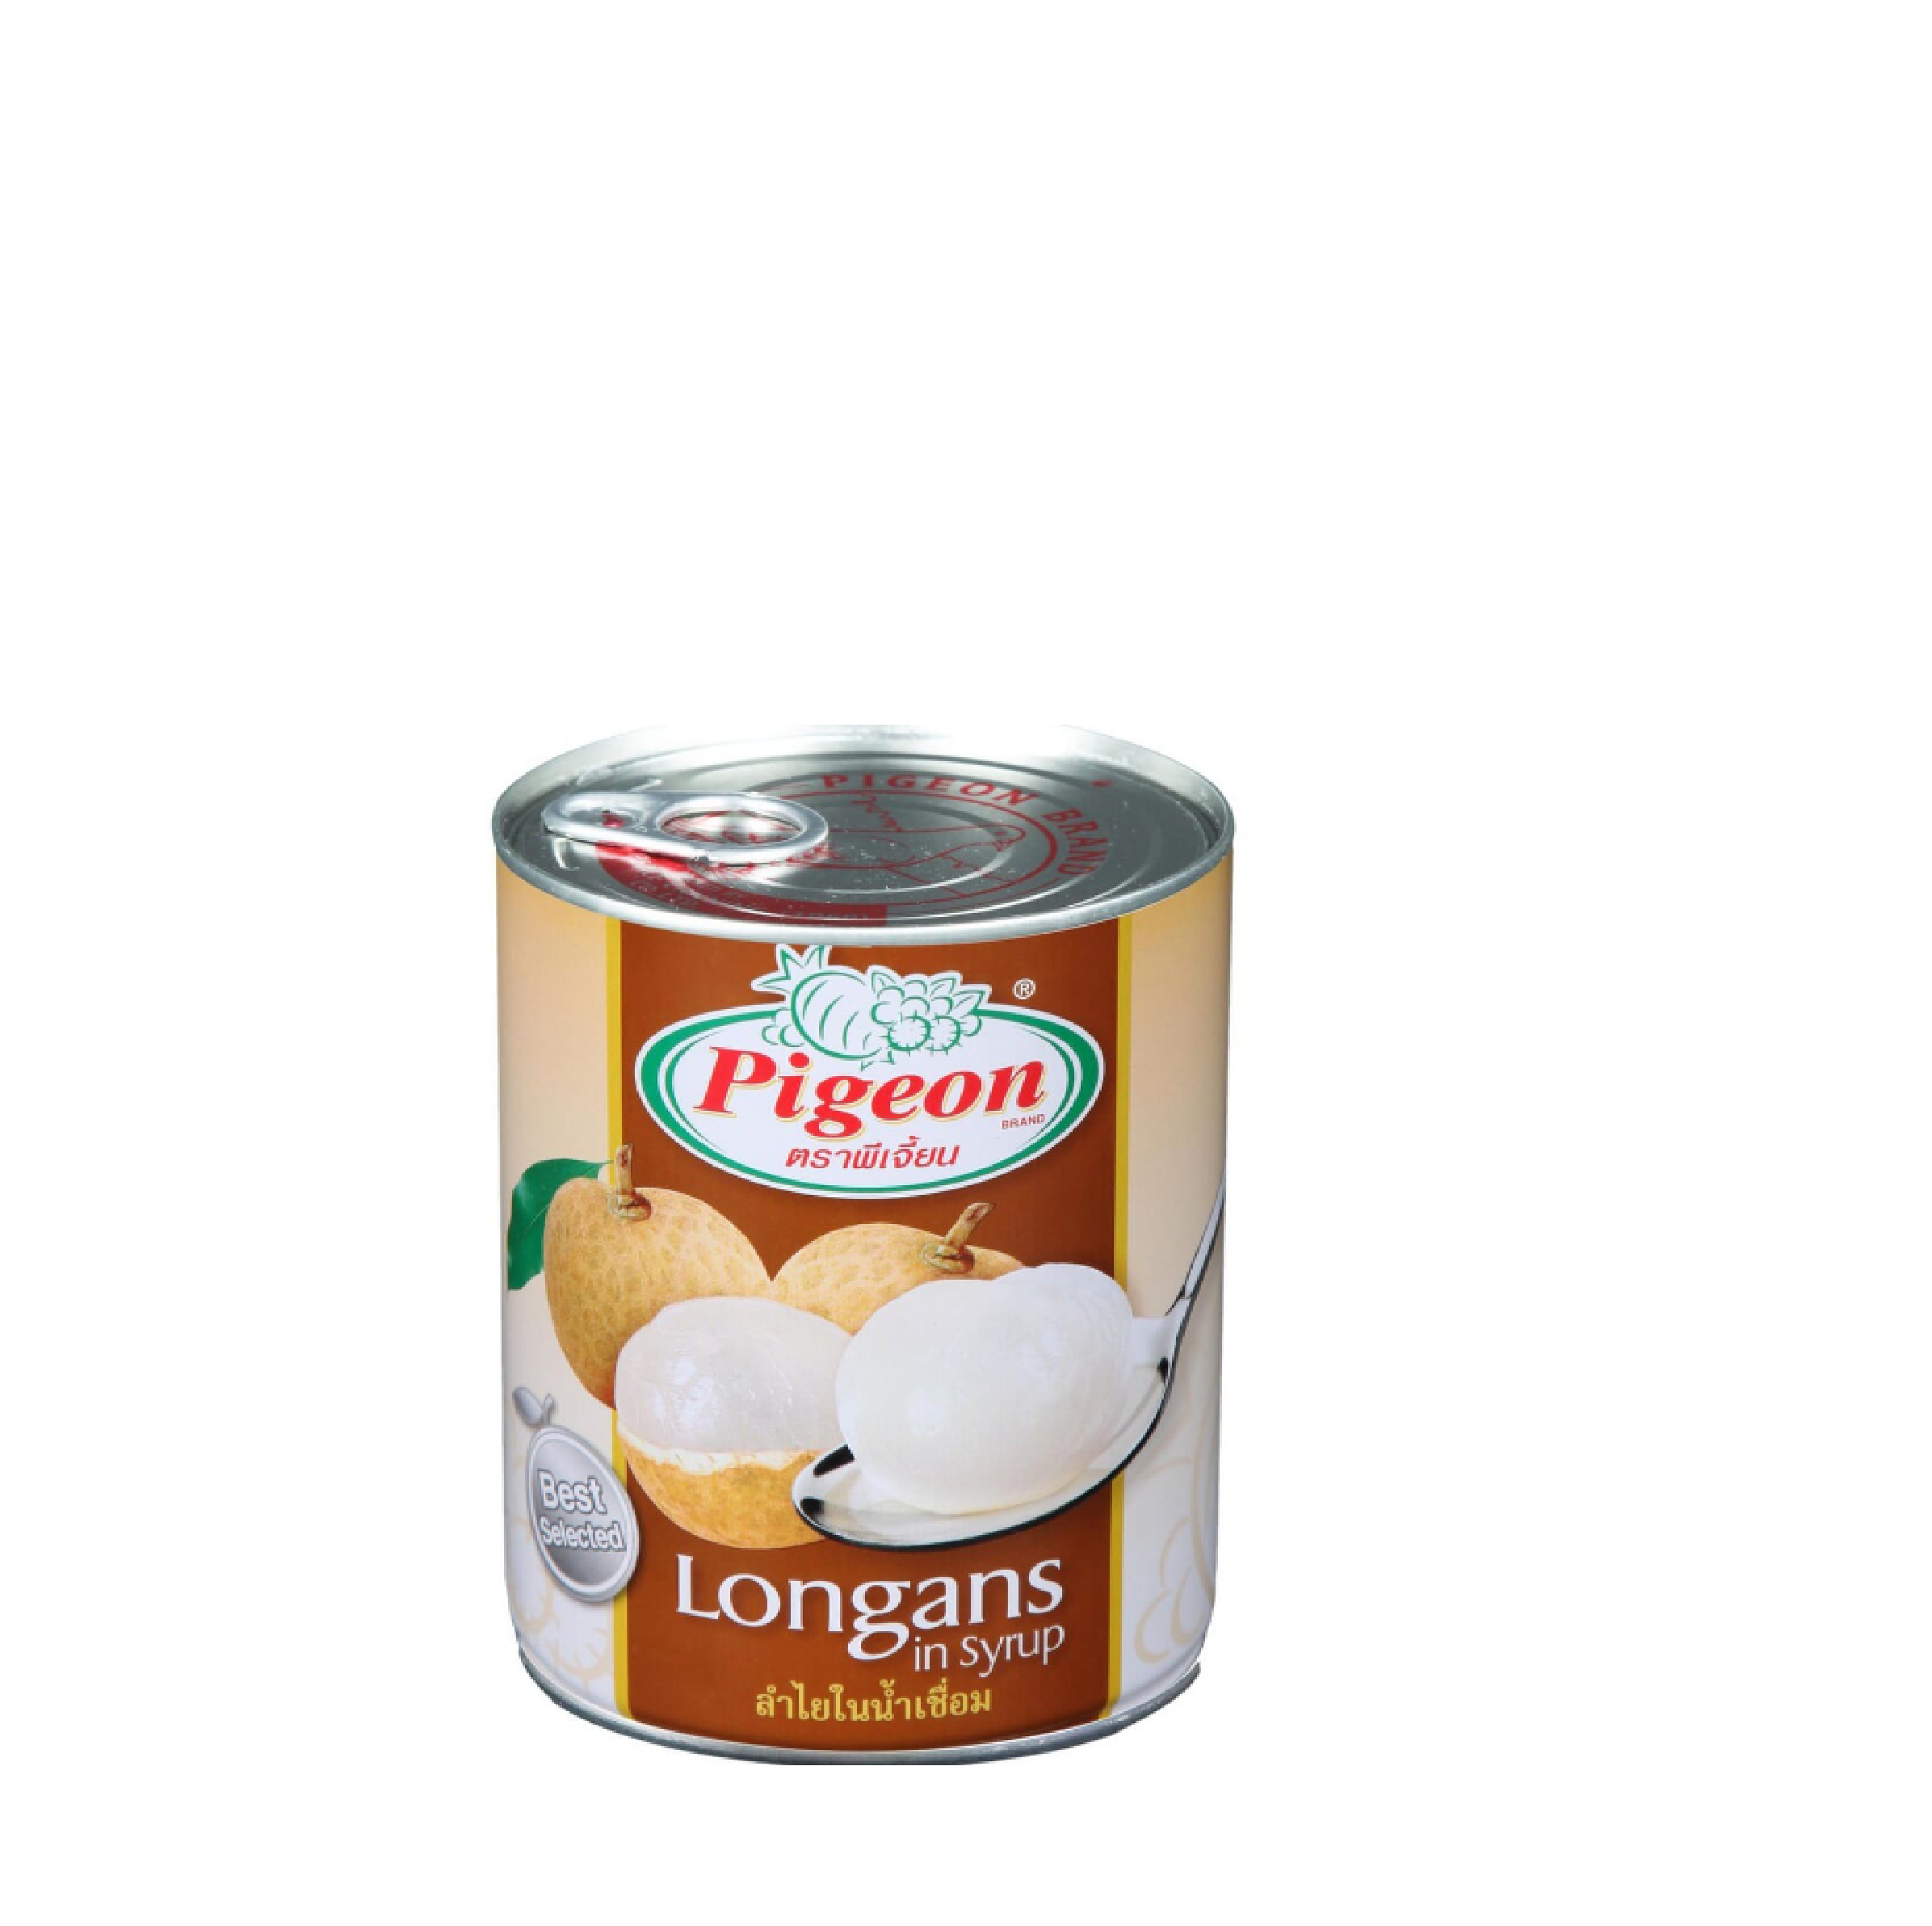 Pigeon Longan in Syrup (565g)